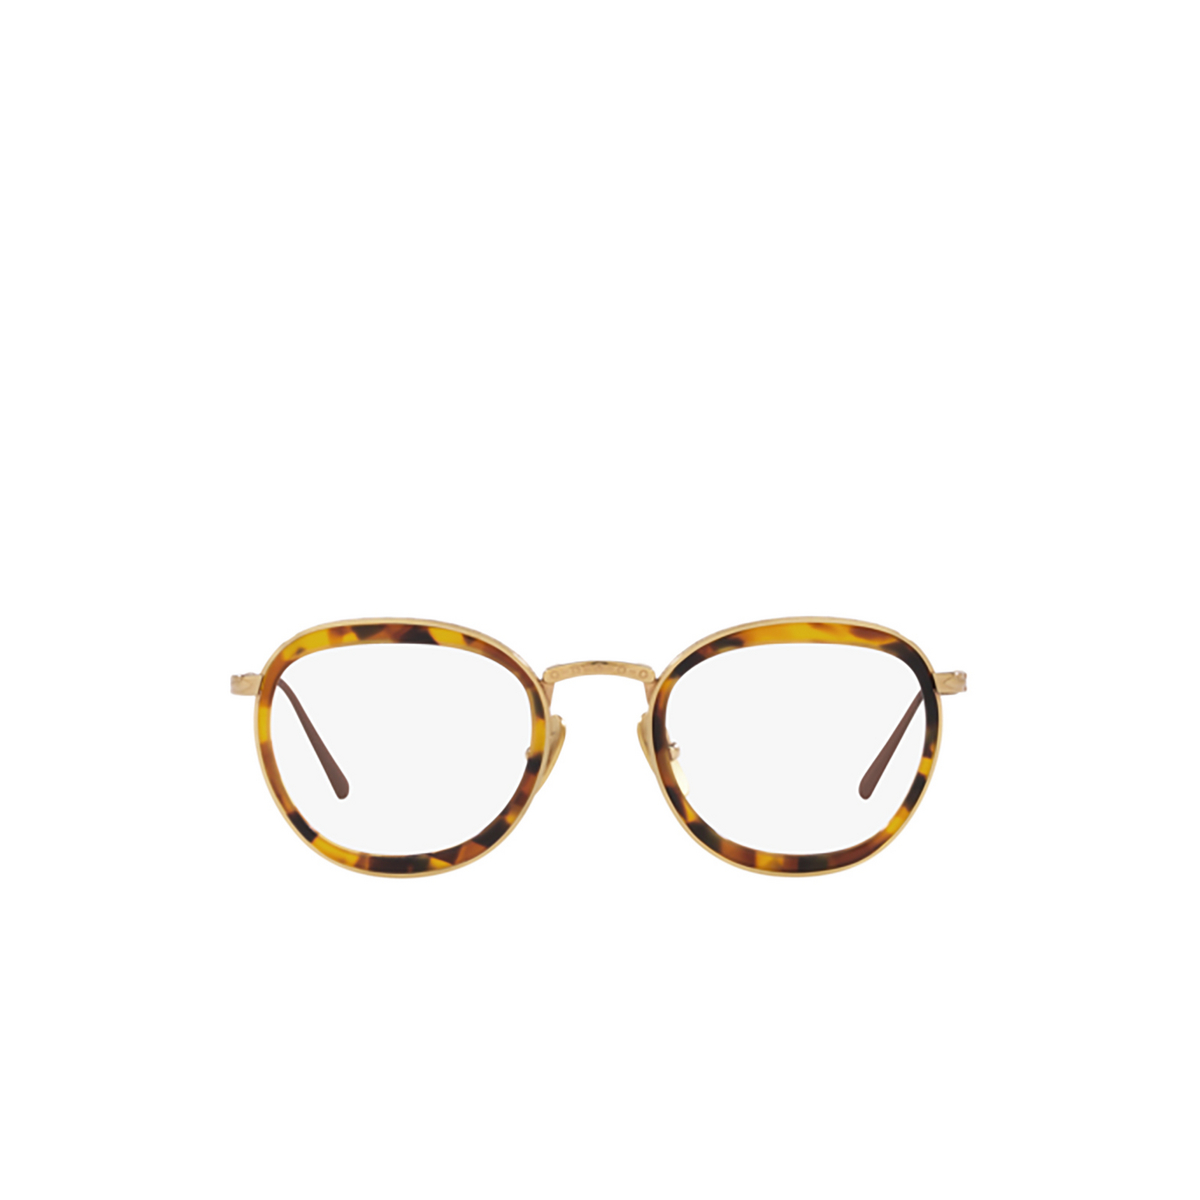 Persol PO5009VT Eyeglasses 8013 Gold - front view